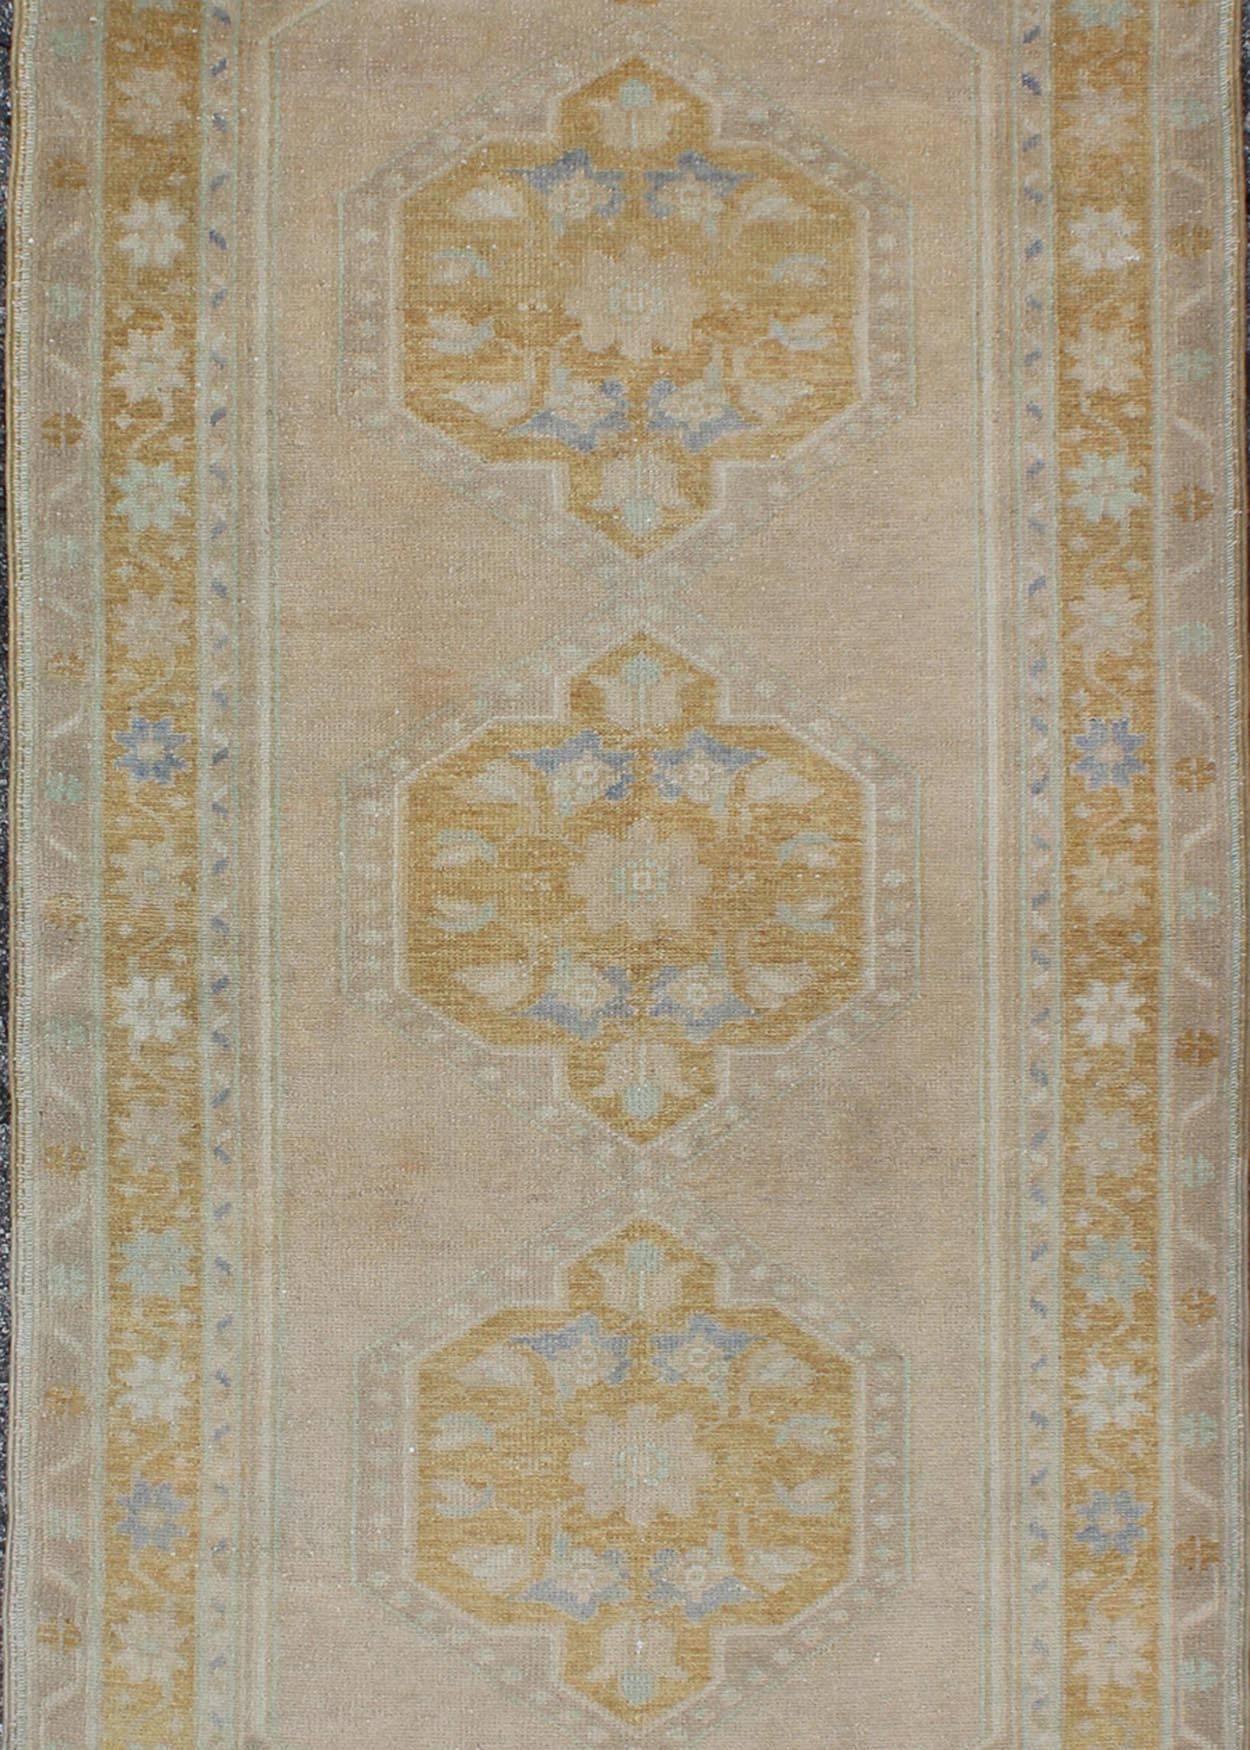  Vintage Turkish Oushak Runner with Floral Medallions In Excellent Condition For Sale In Atlanta, GA